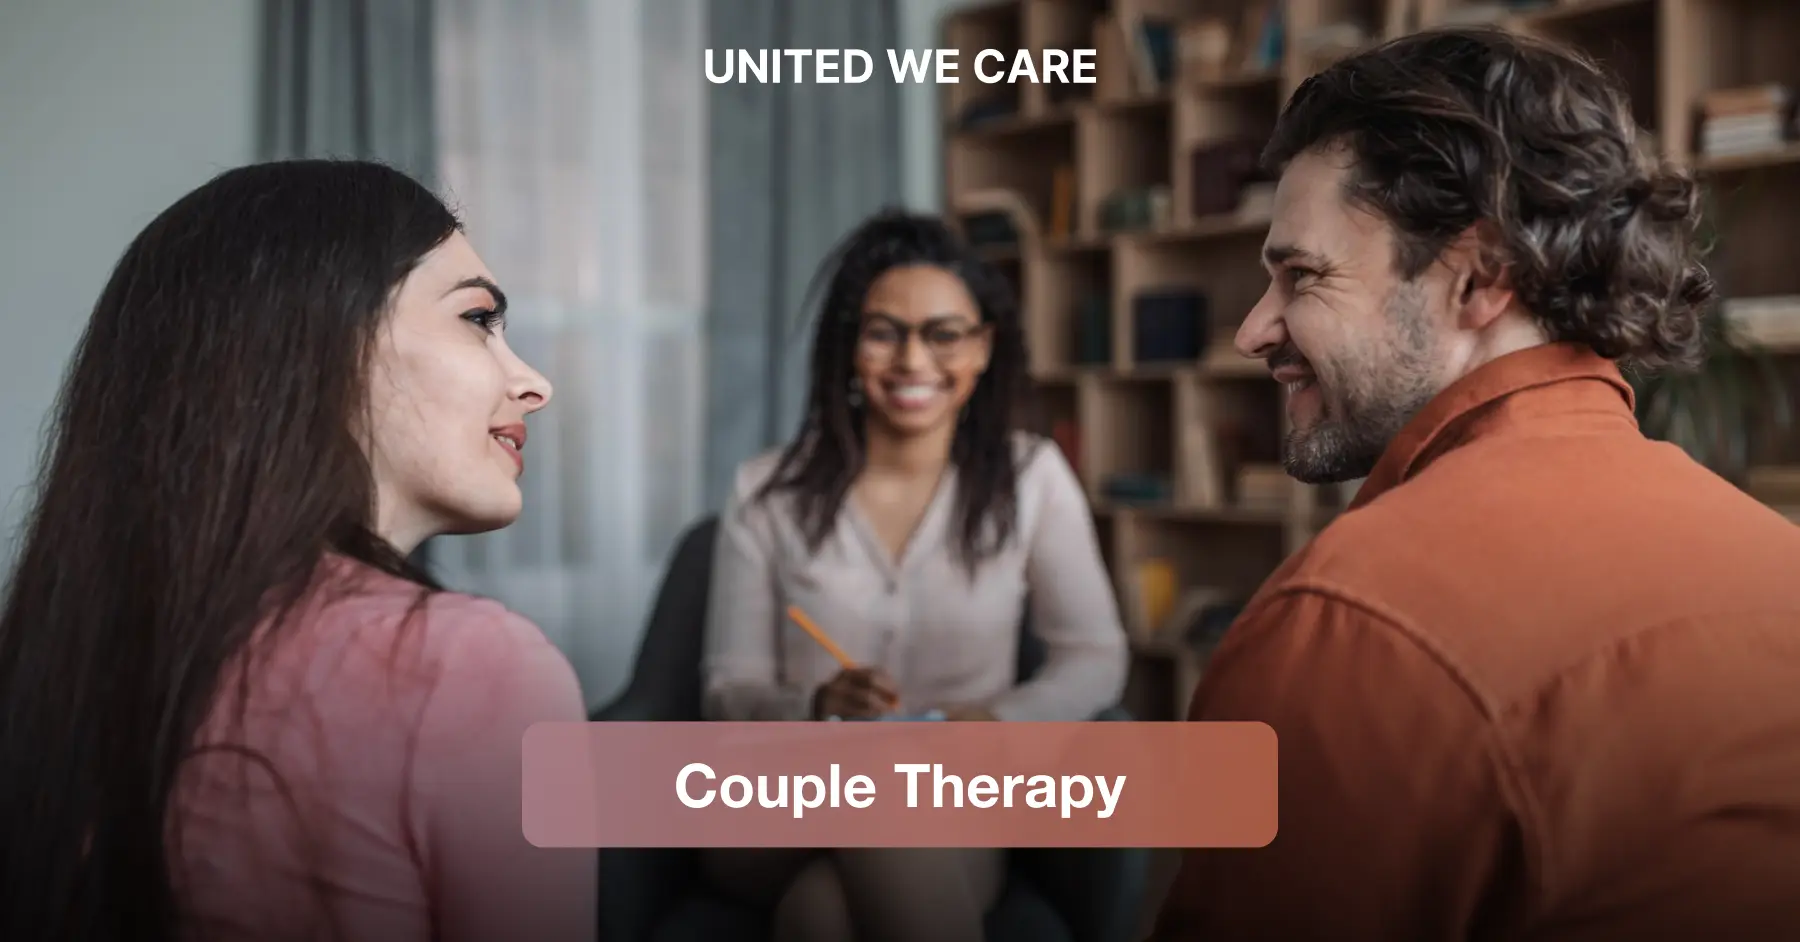 Couples Therapy: 7 Impactful Benefits of Strengthening Your Relationship